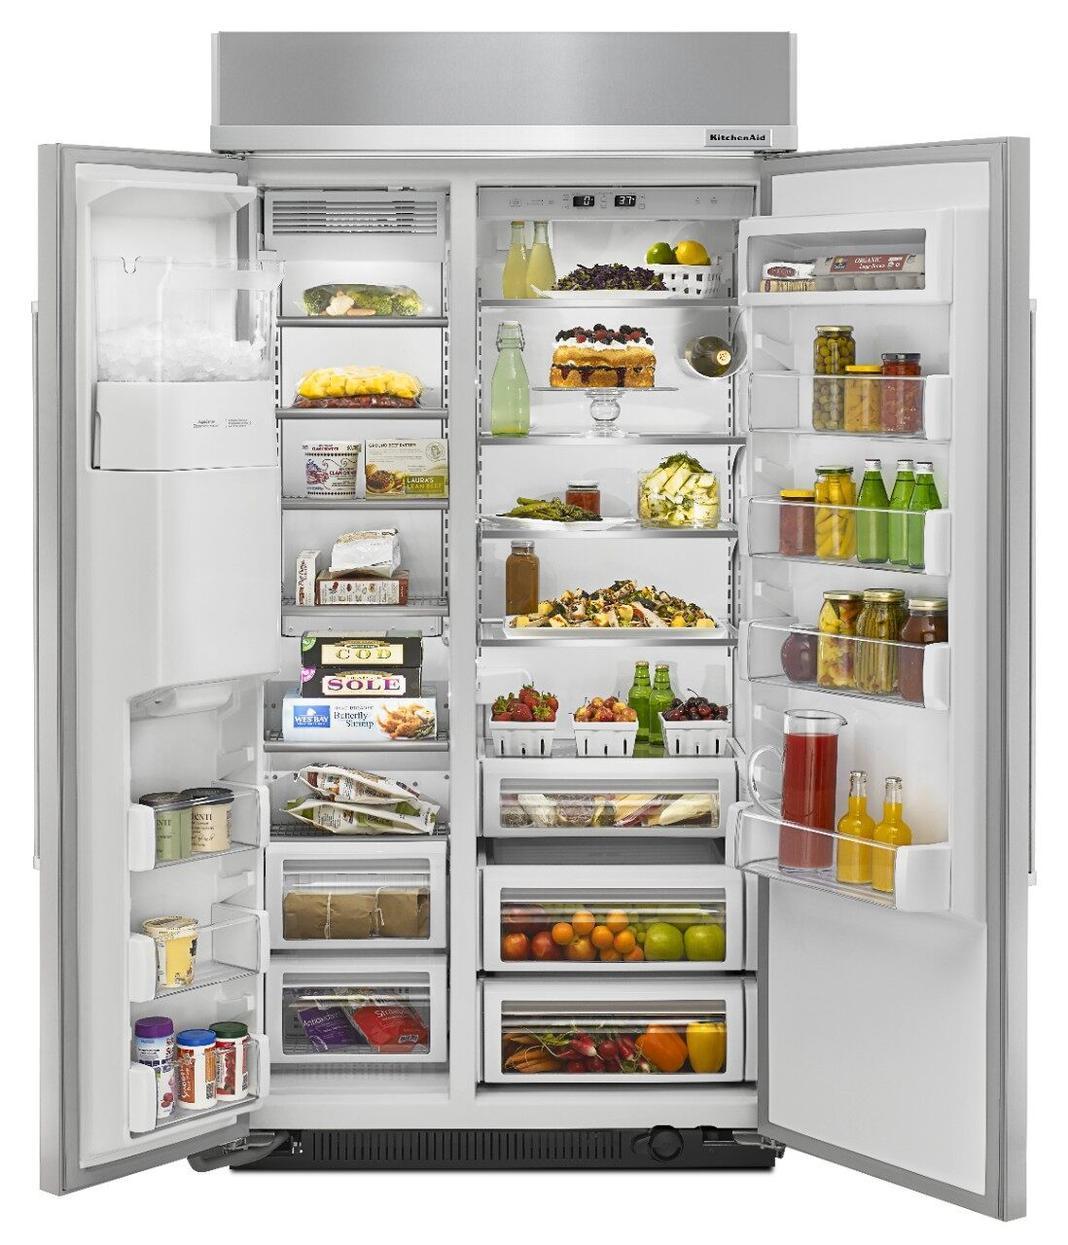 KitchenAid - 42.25 Inch 25 cu. ft Side by Side Refrigerator in Stainless - KBSD602ESS